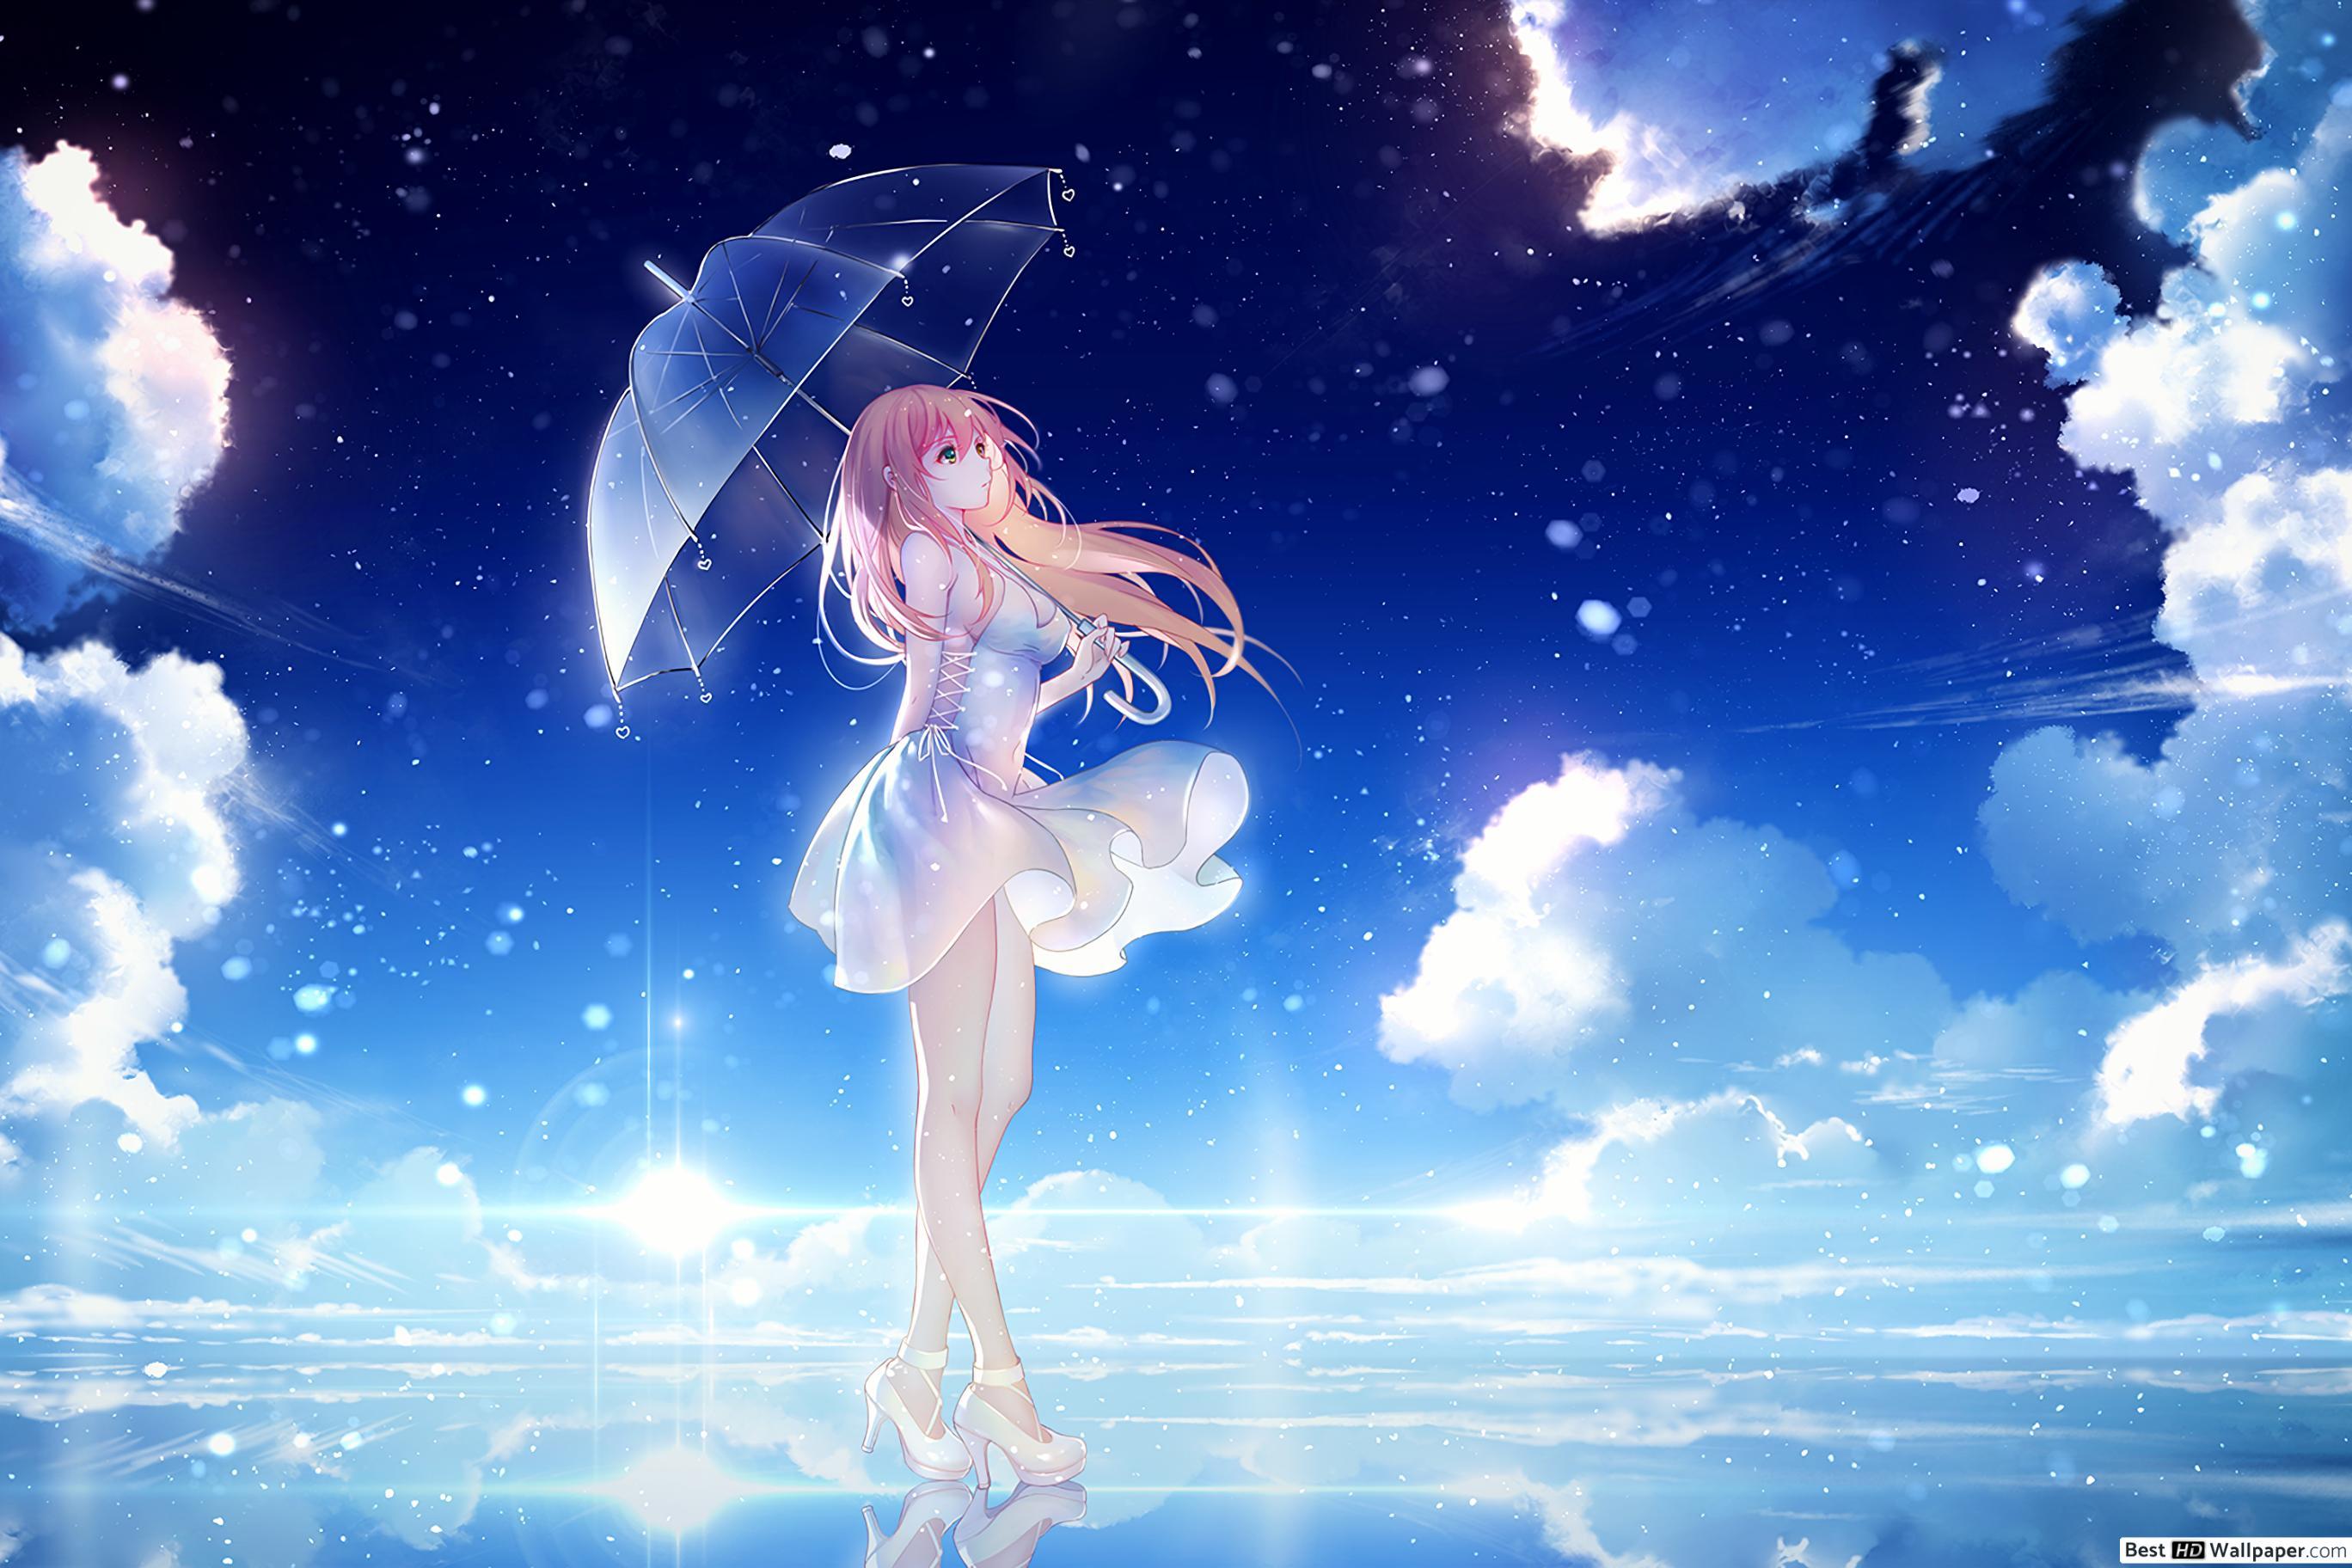 Another/#1575036  Anime, Anime images, Anime wallpaper